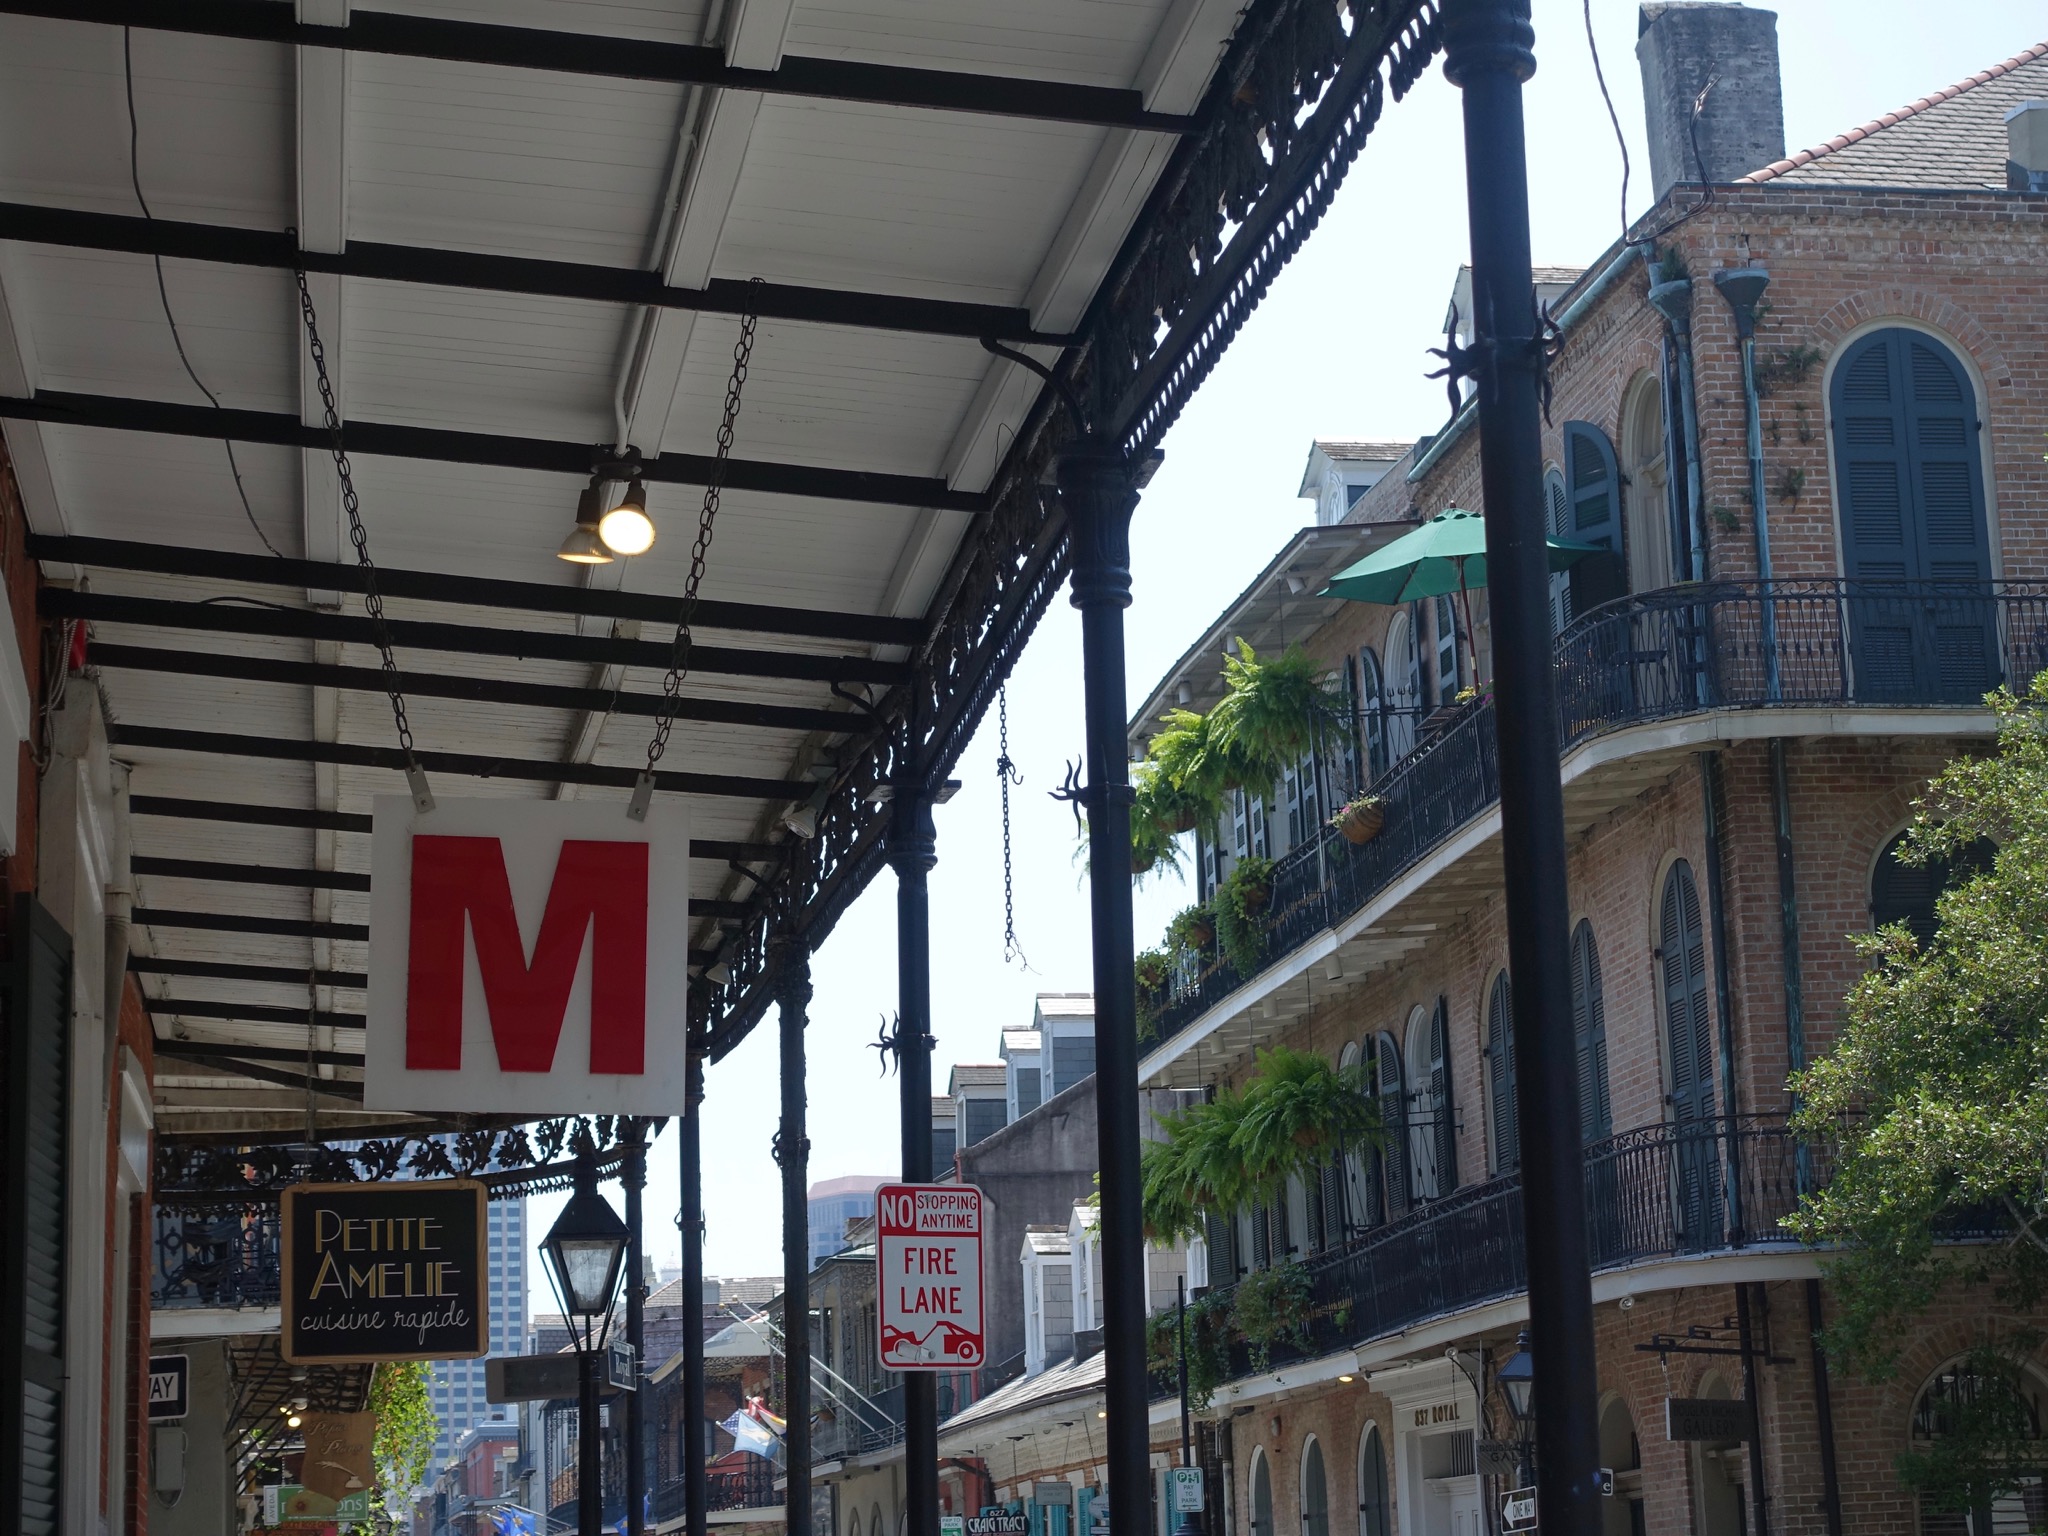 Photo 11 of 56 from the album Highlights New Orleans 2015.